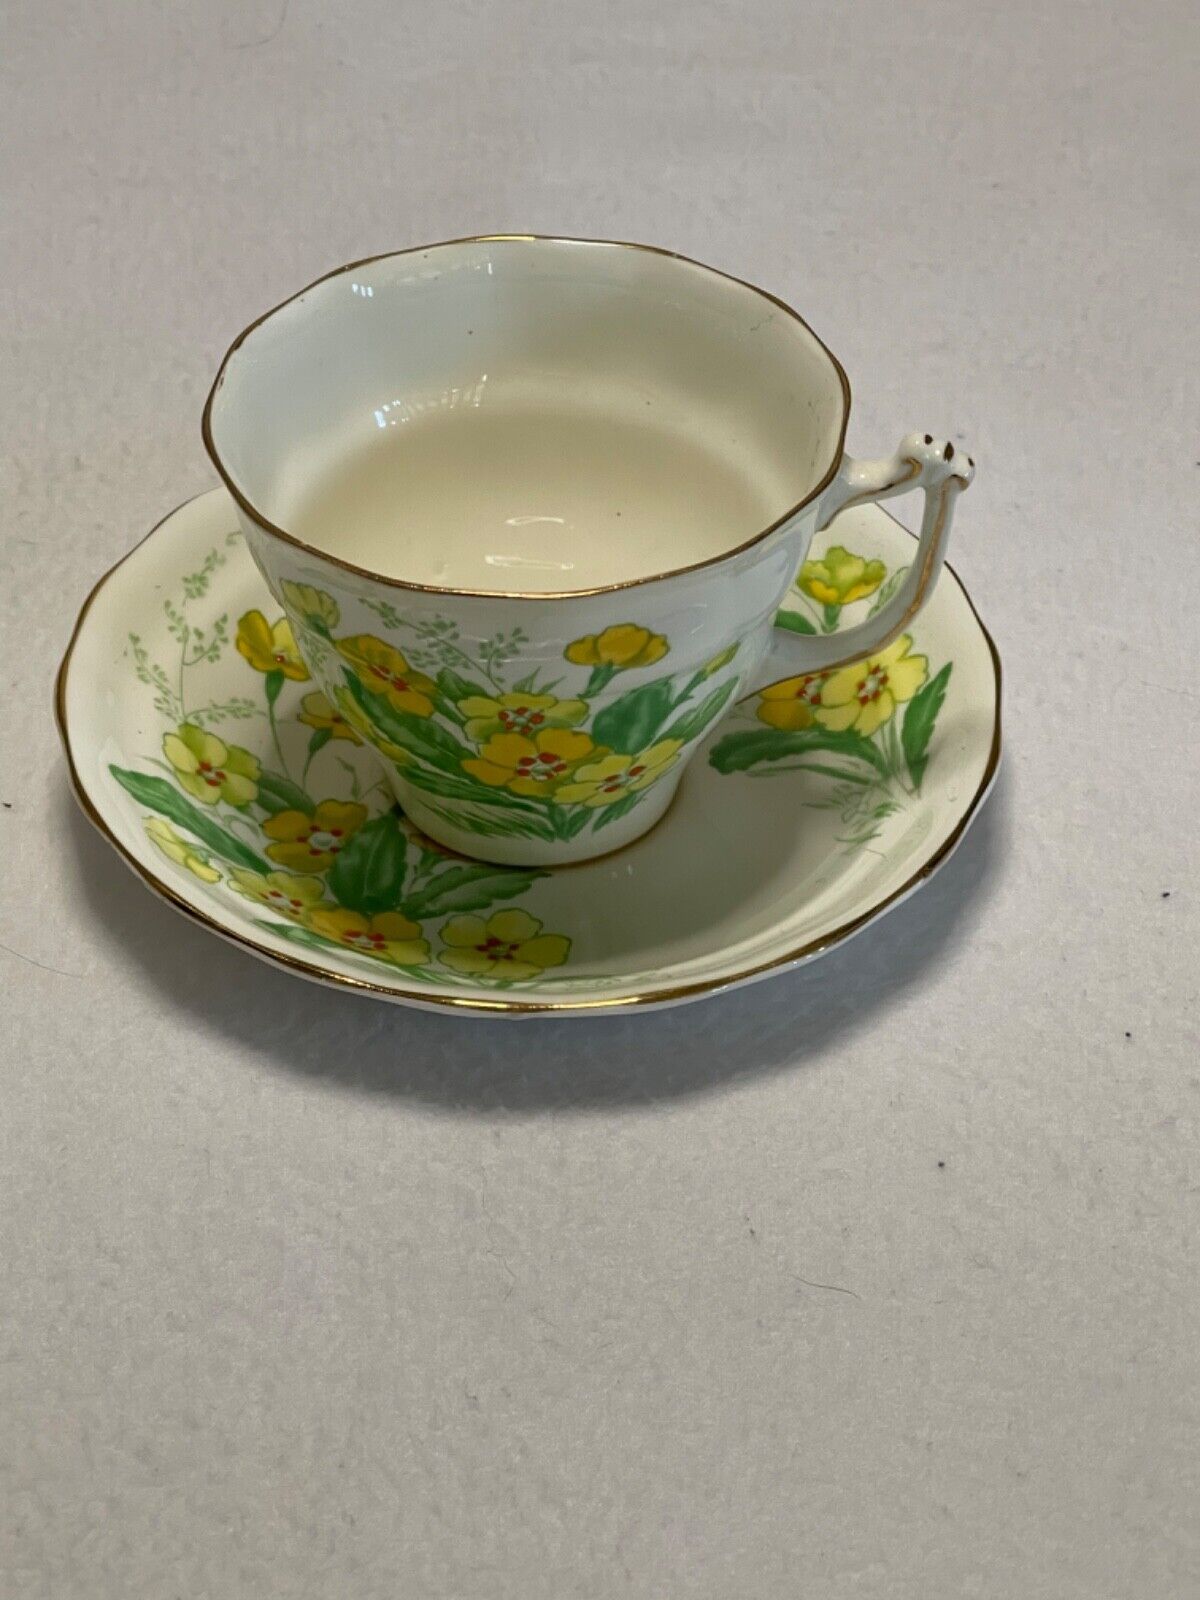 Old Royal Bone China Vintage Teacup & Saucer Set Yellow Floral With Gold Trim